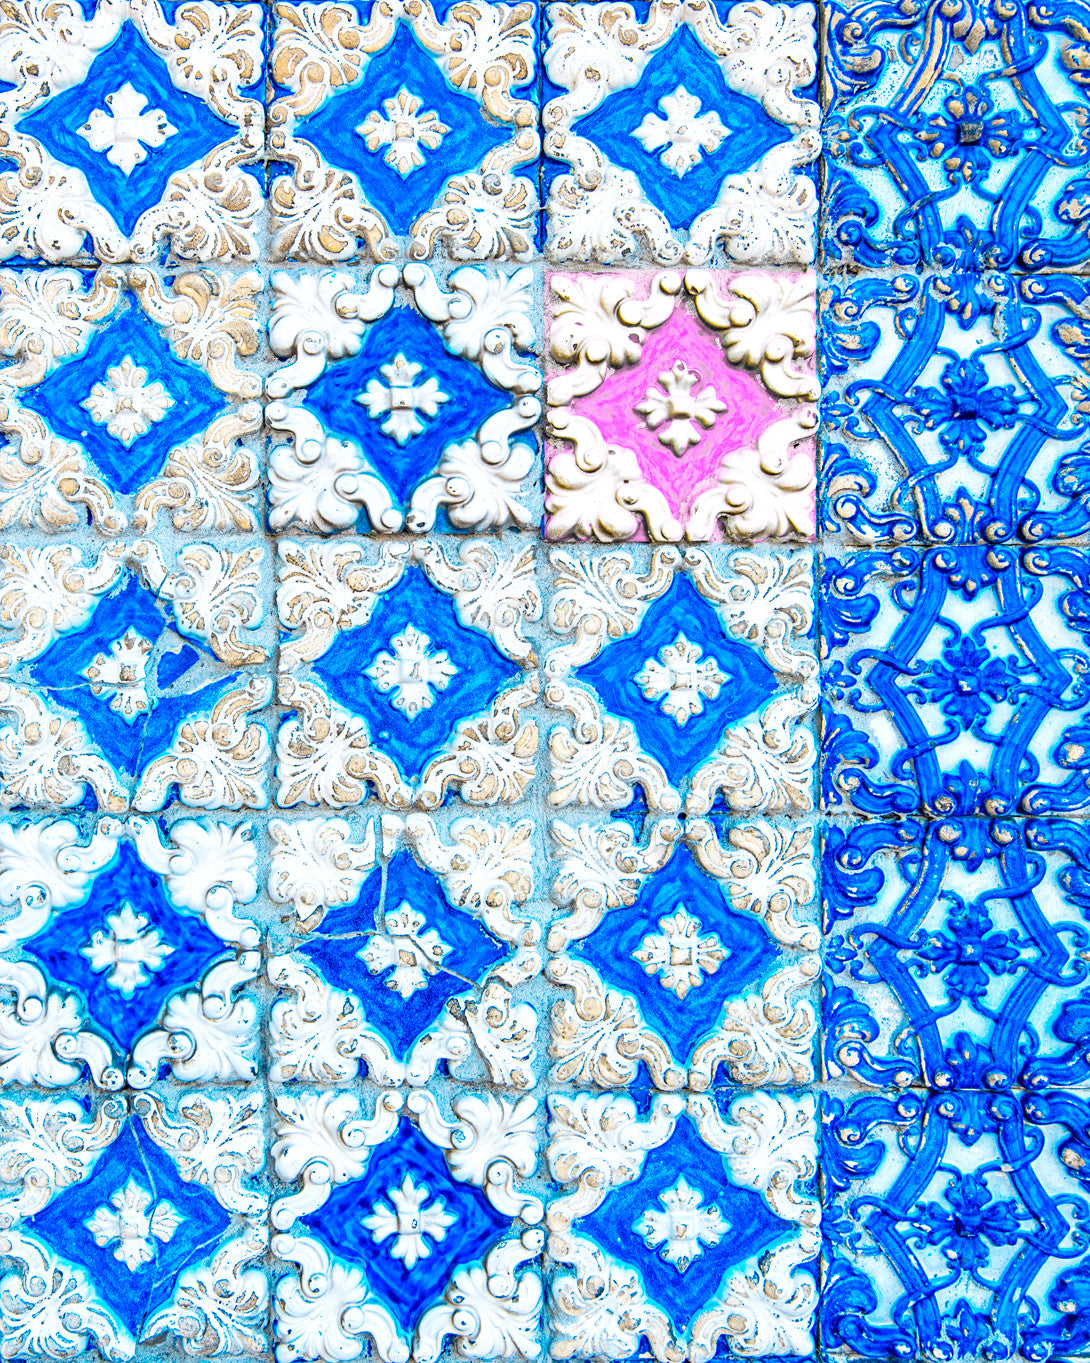 Pink and Blue Tiles